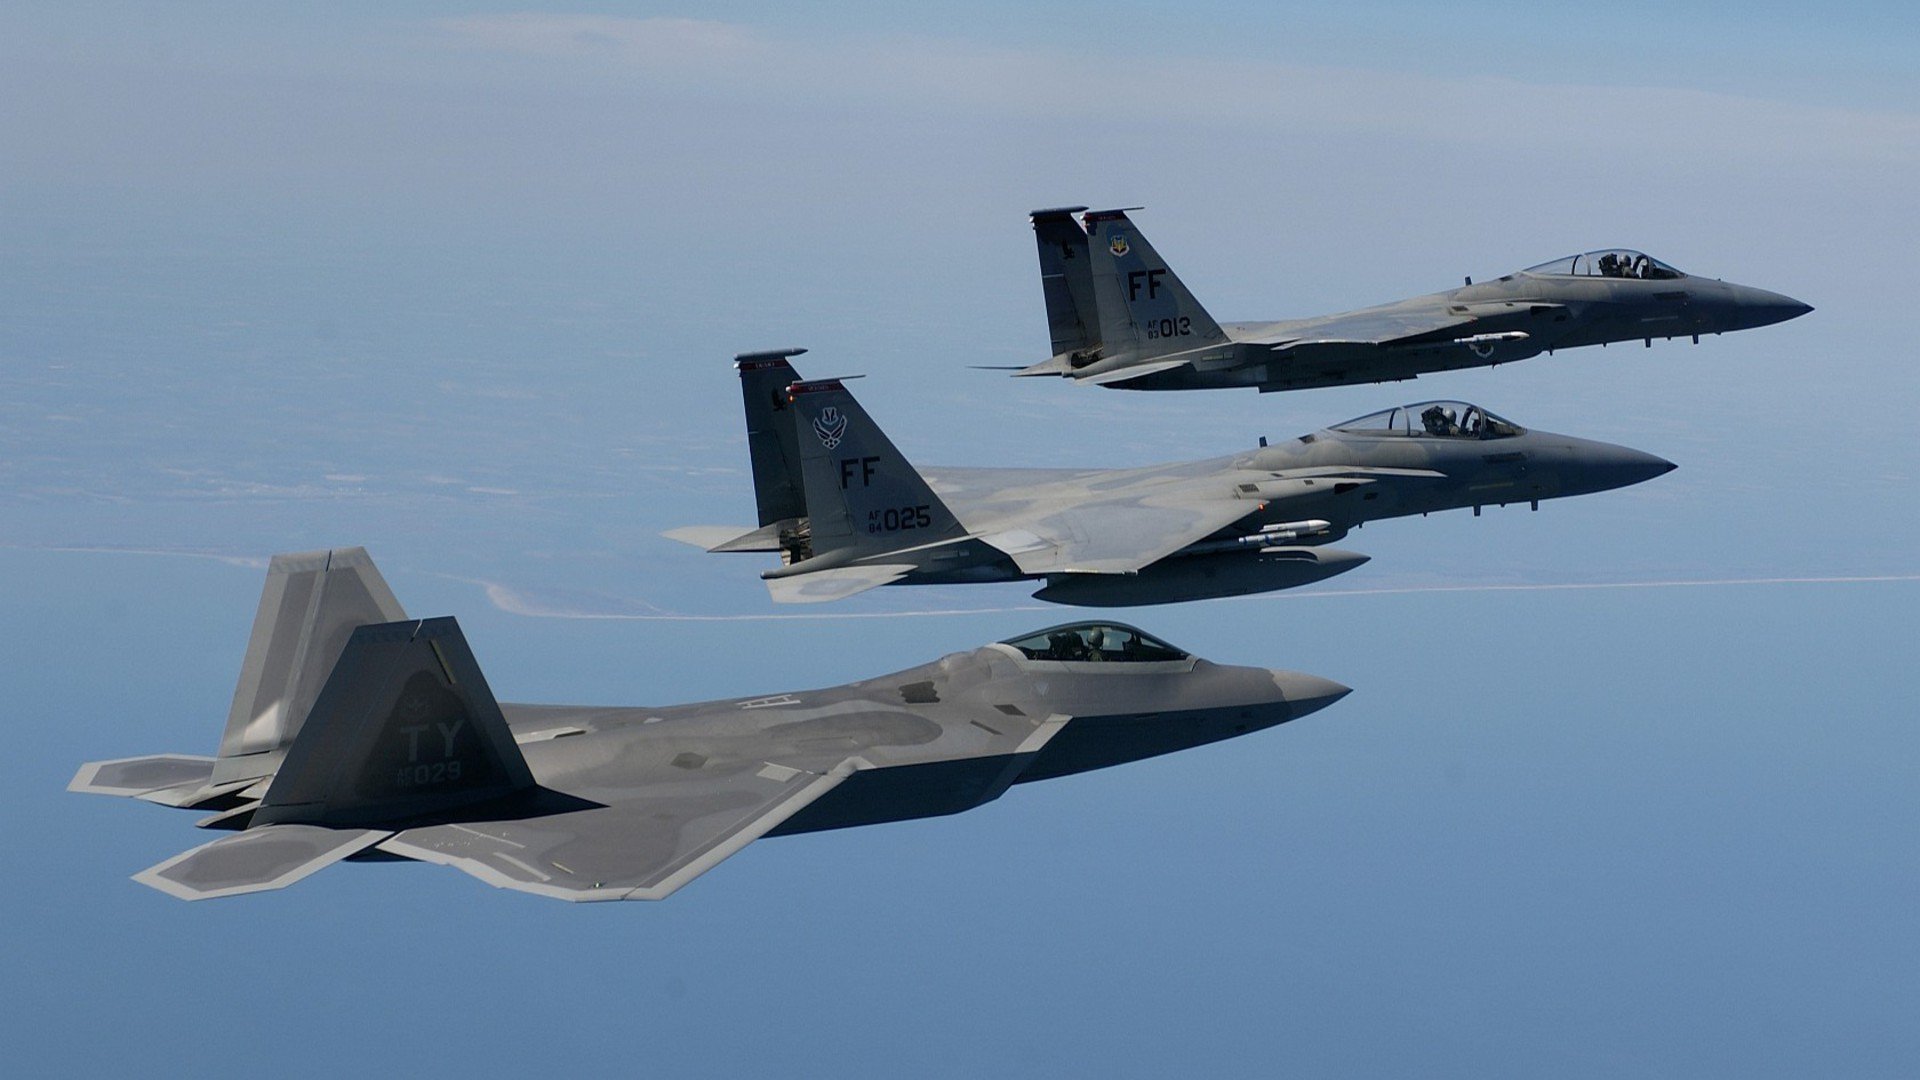 Military Jets Hd Wallpapers in Aircraft Imagescicom